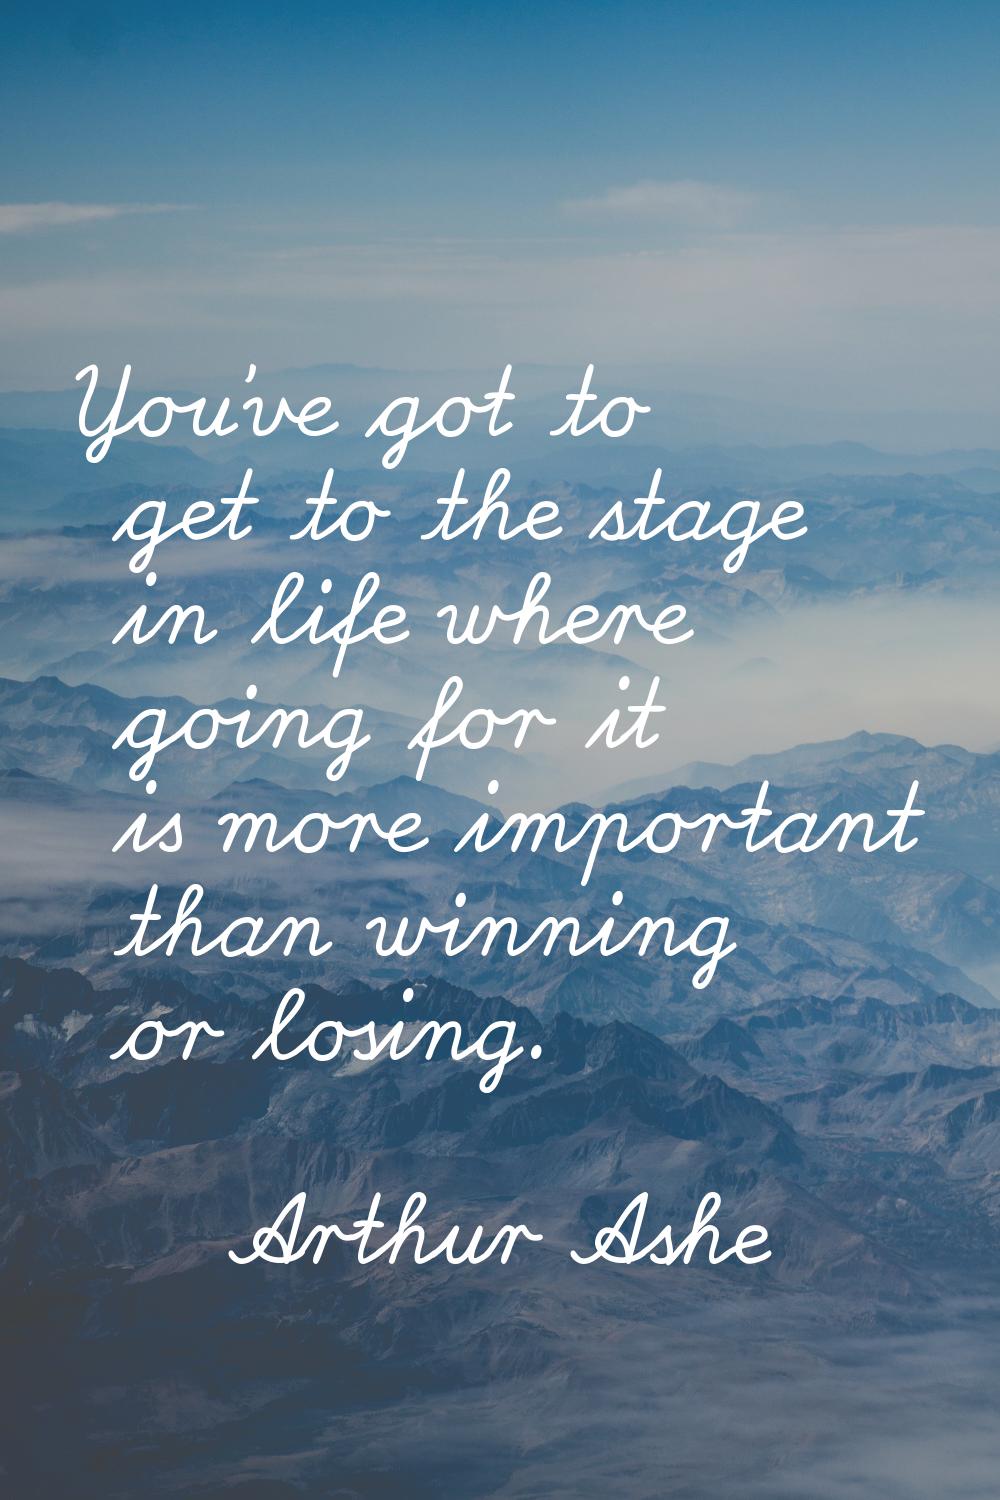 You've got to get to the stage in life where going for it is more important than winning or losing.